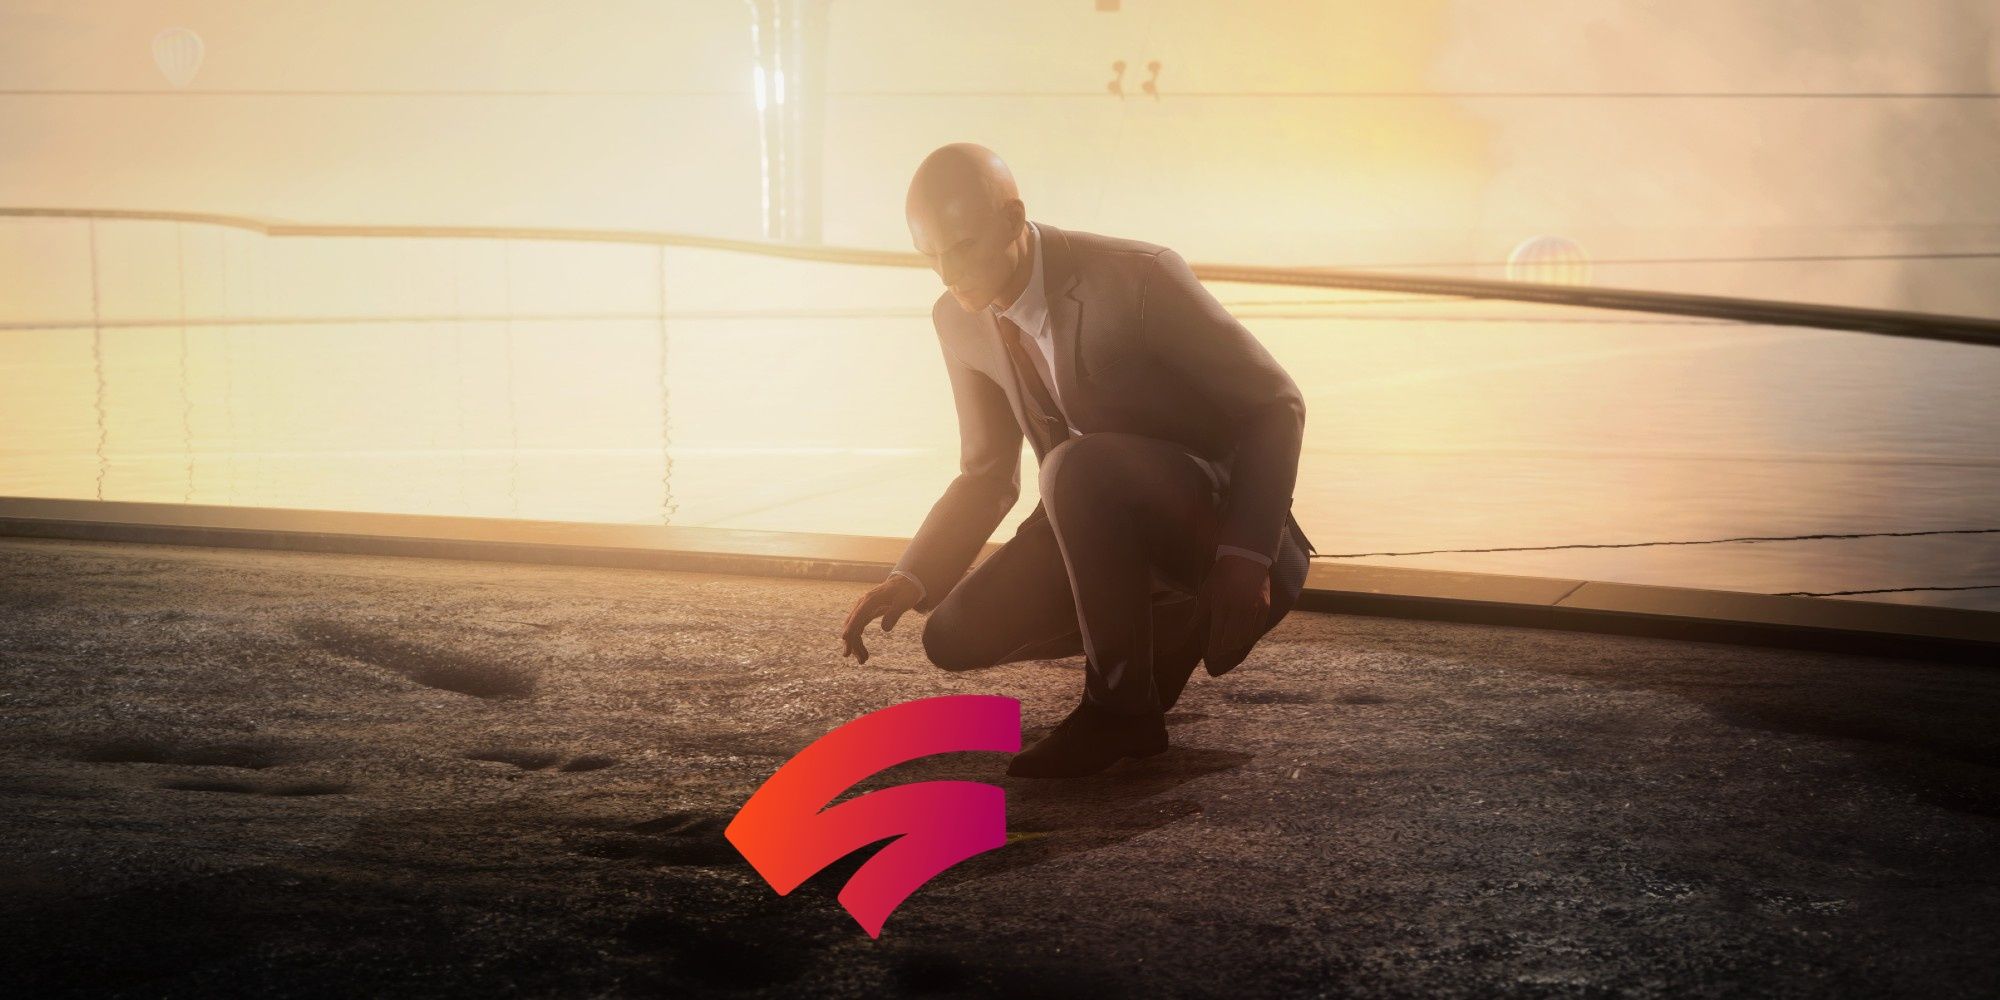 Hitman Dev Tells Stadia Players It's Looking For A Way To Transfer Progress